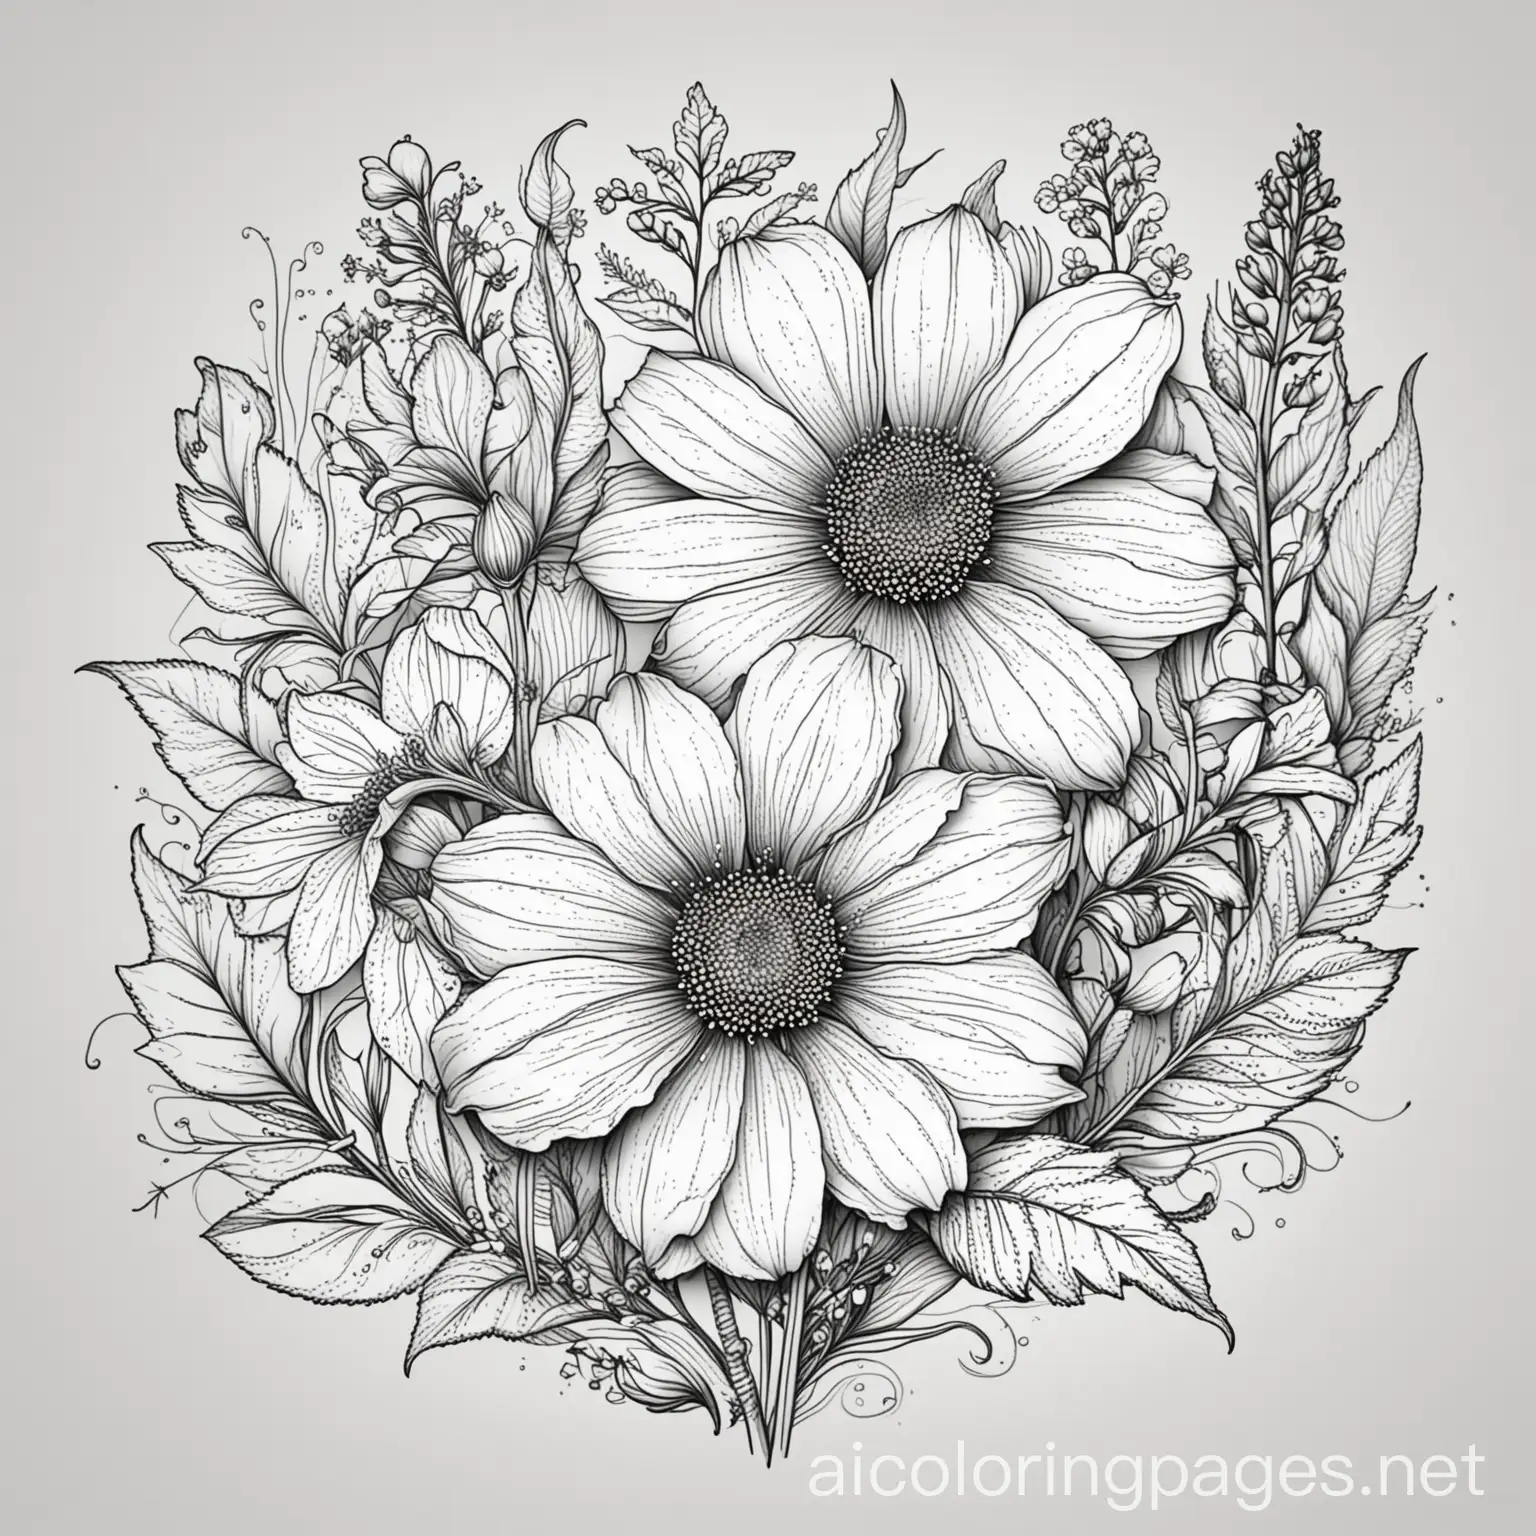 Detailed-Floral-Coloring-Page-Intricate-Flowers-for-Relaxing-Coloring